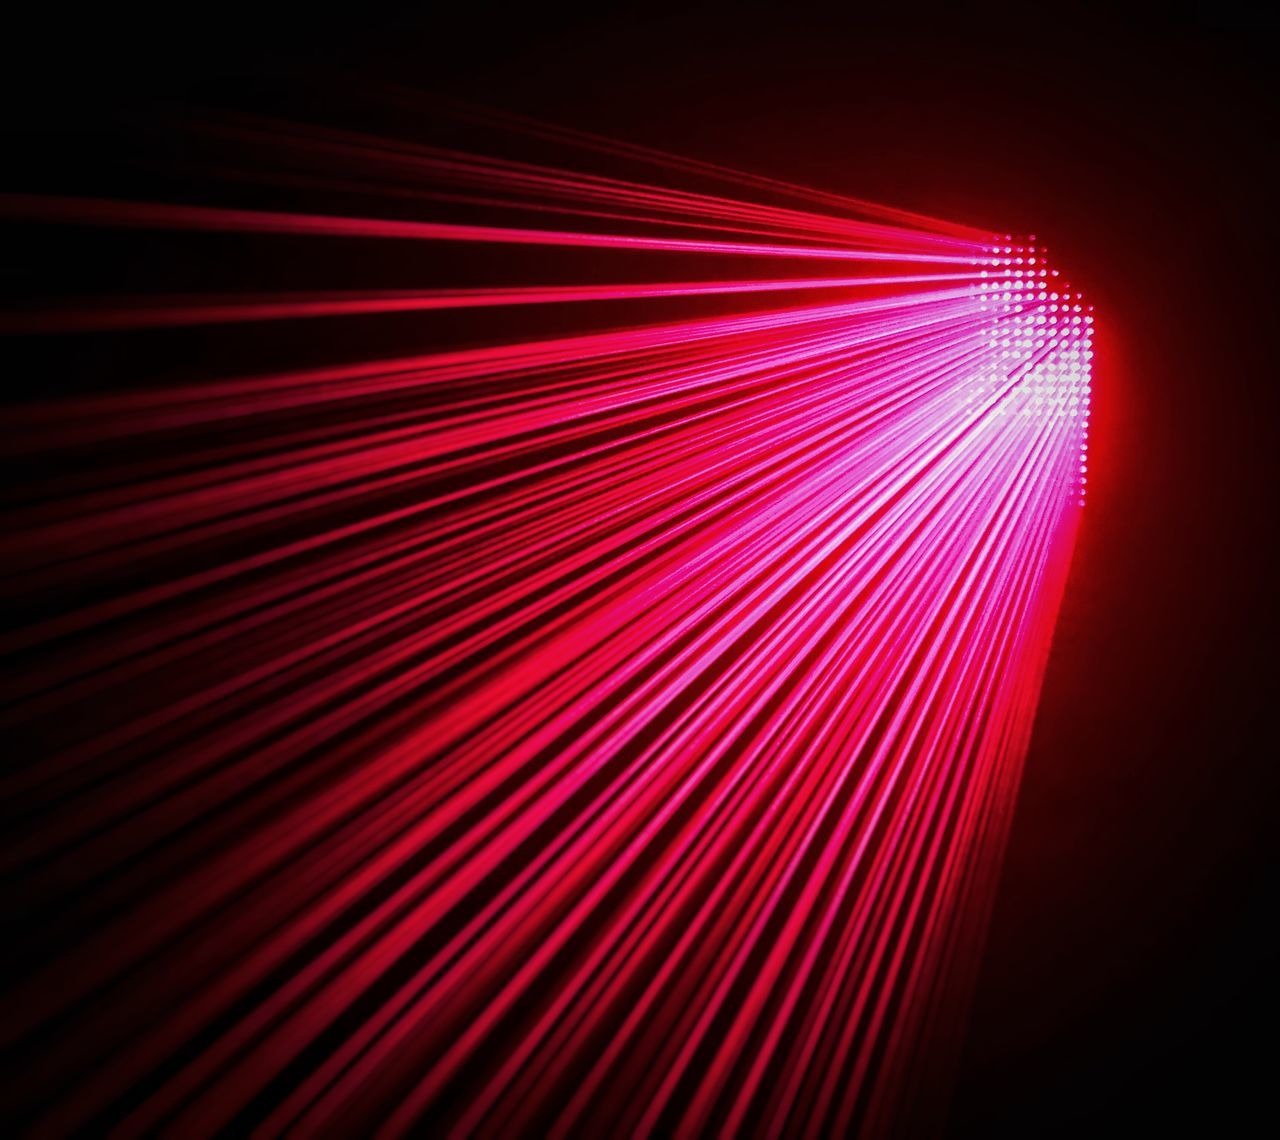 red, illuminated, backgrounds, abstract, pattern, light - natural phenomenon, studio shot, technology, creativity, light, indoors, multi colored, laser, lighting equipment, no people, motion, glowing, vibrant color, light effect, nightlife, electricity, lightweight, black background, textured effect